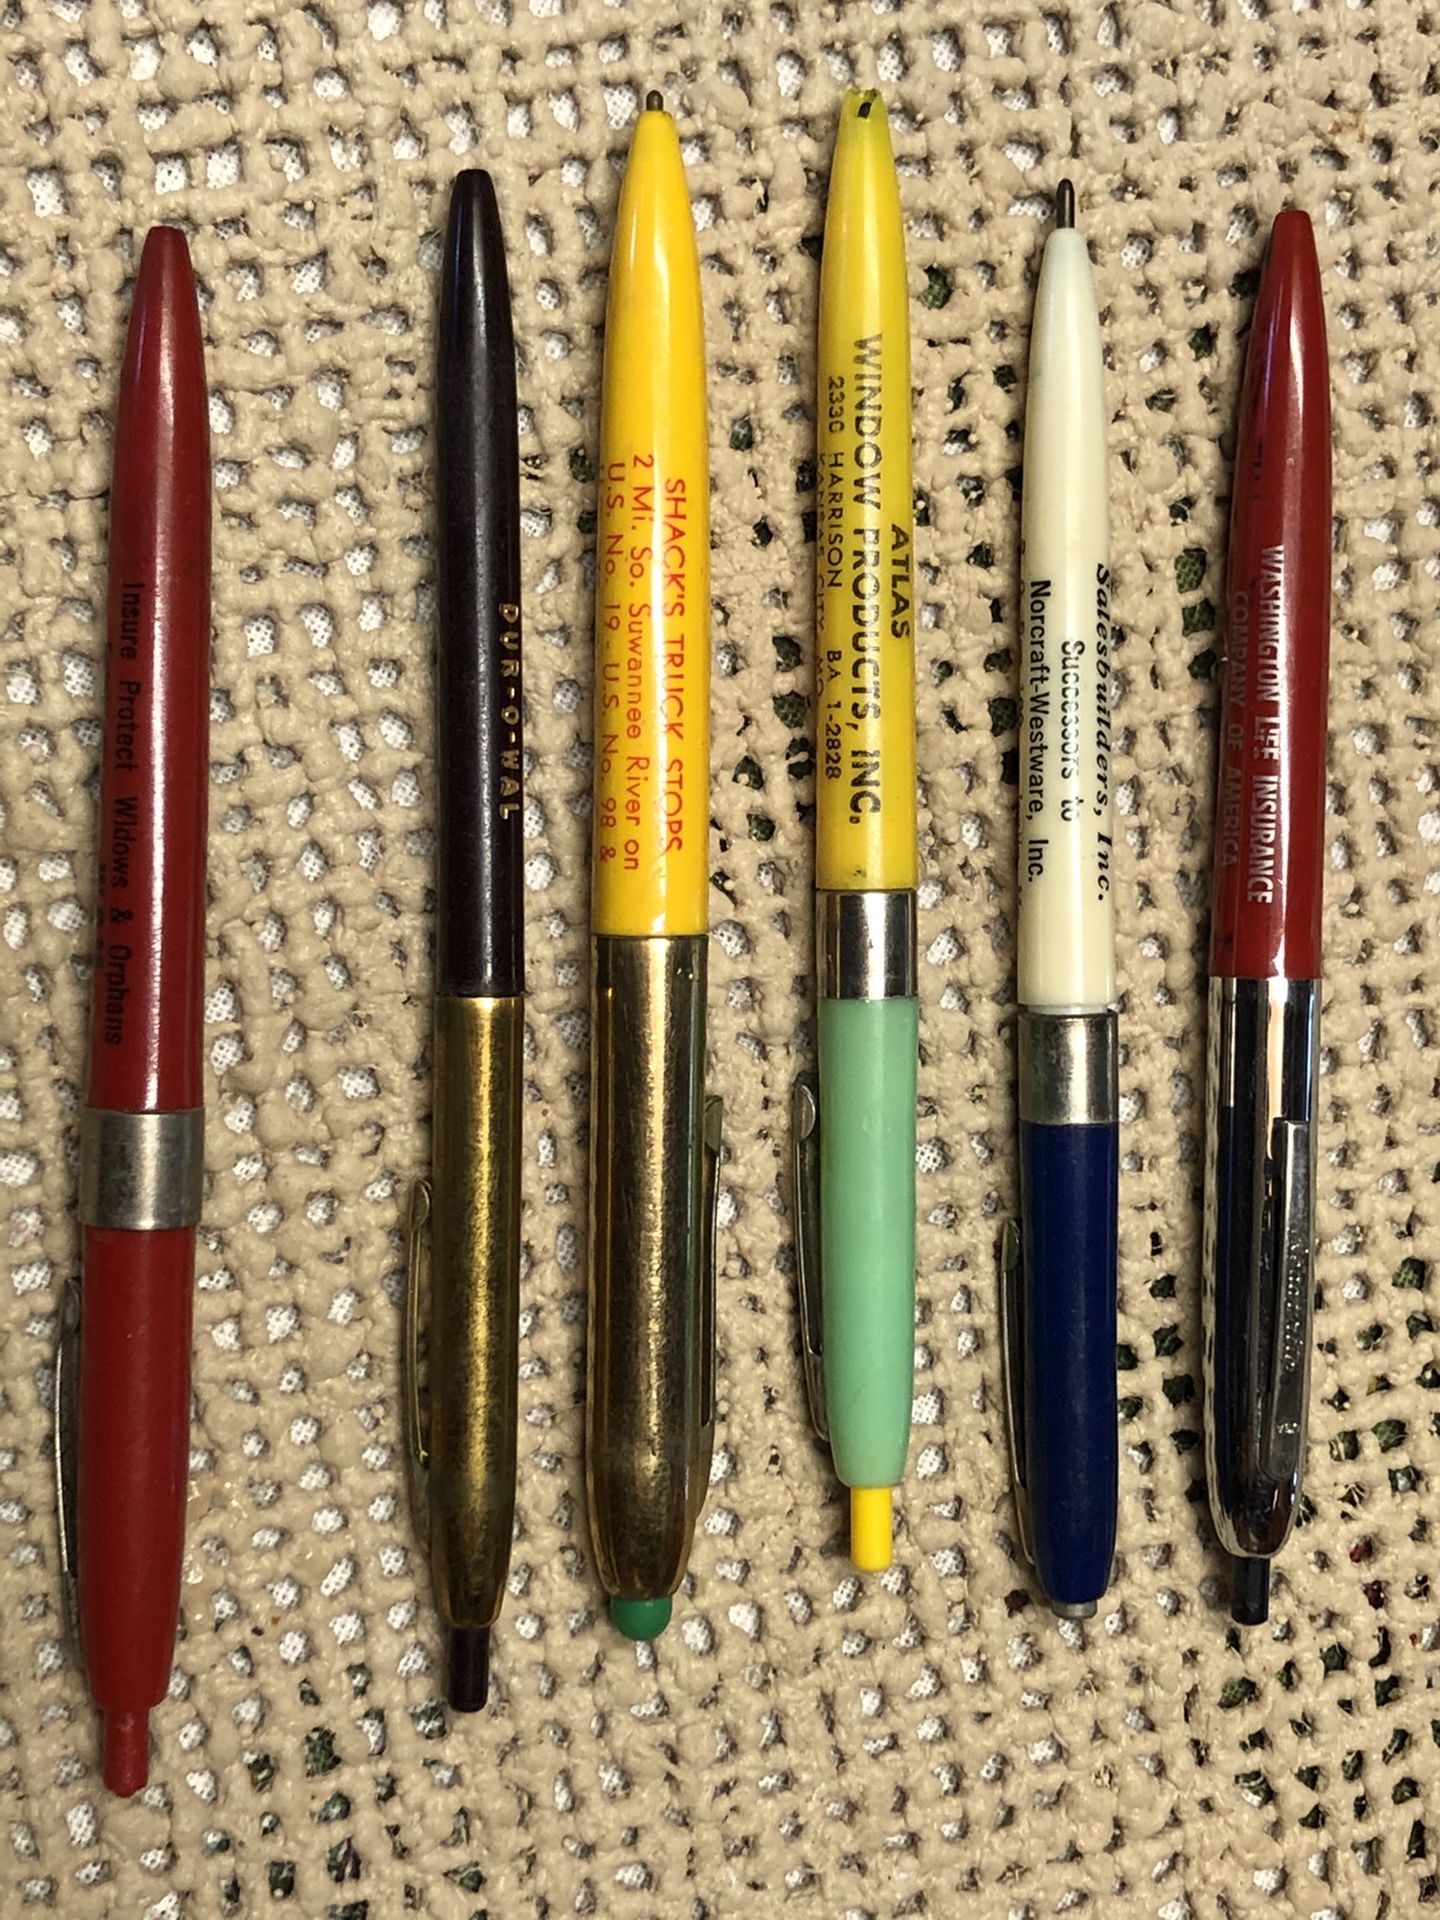 6 VINTAGE BALL POINT PENS